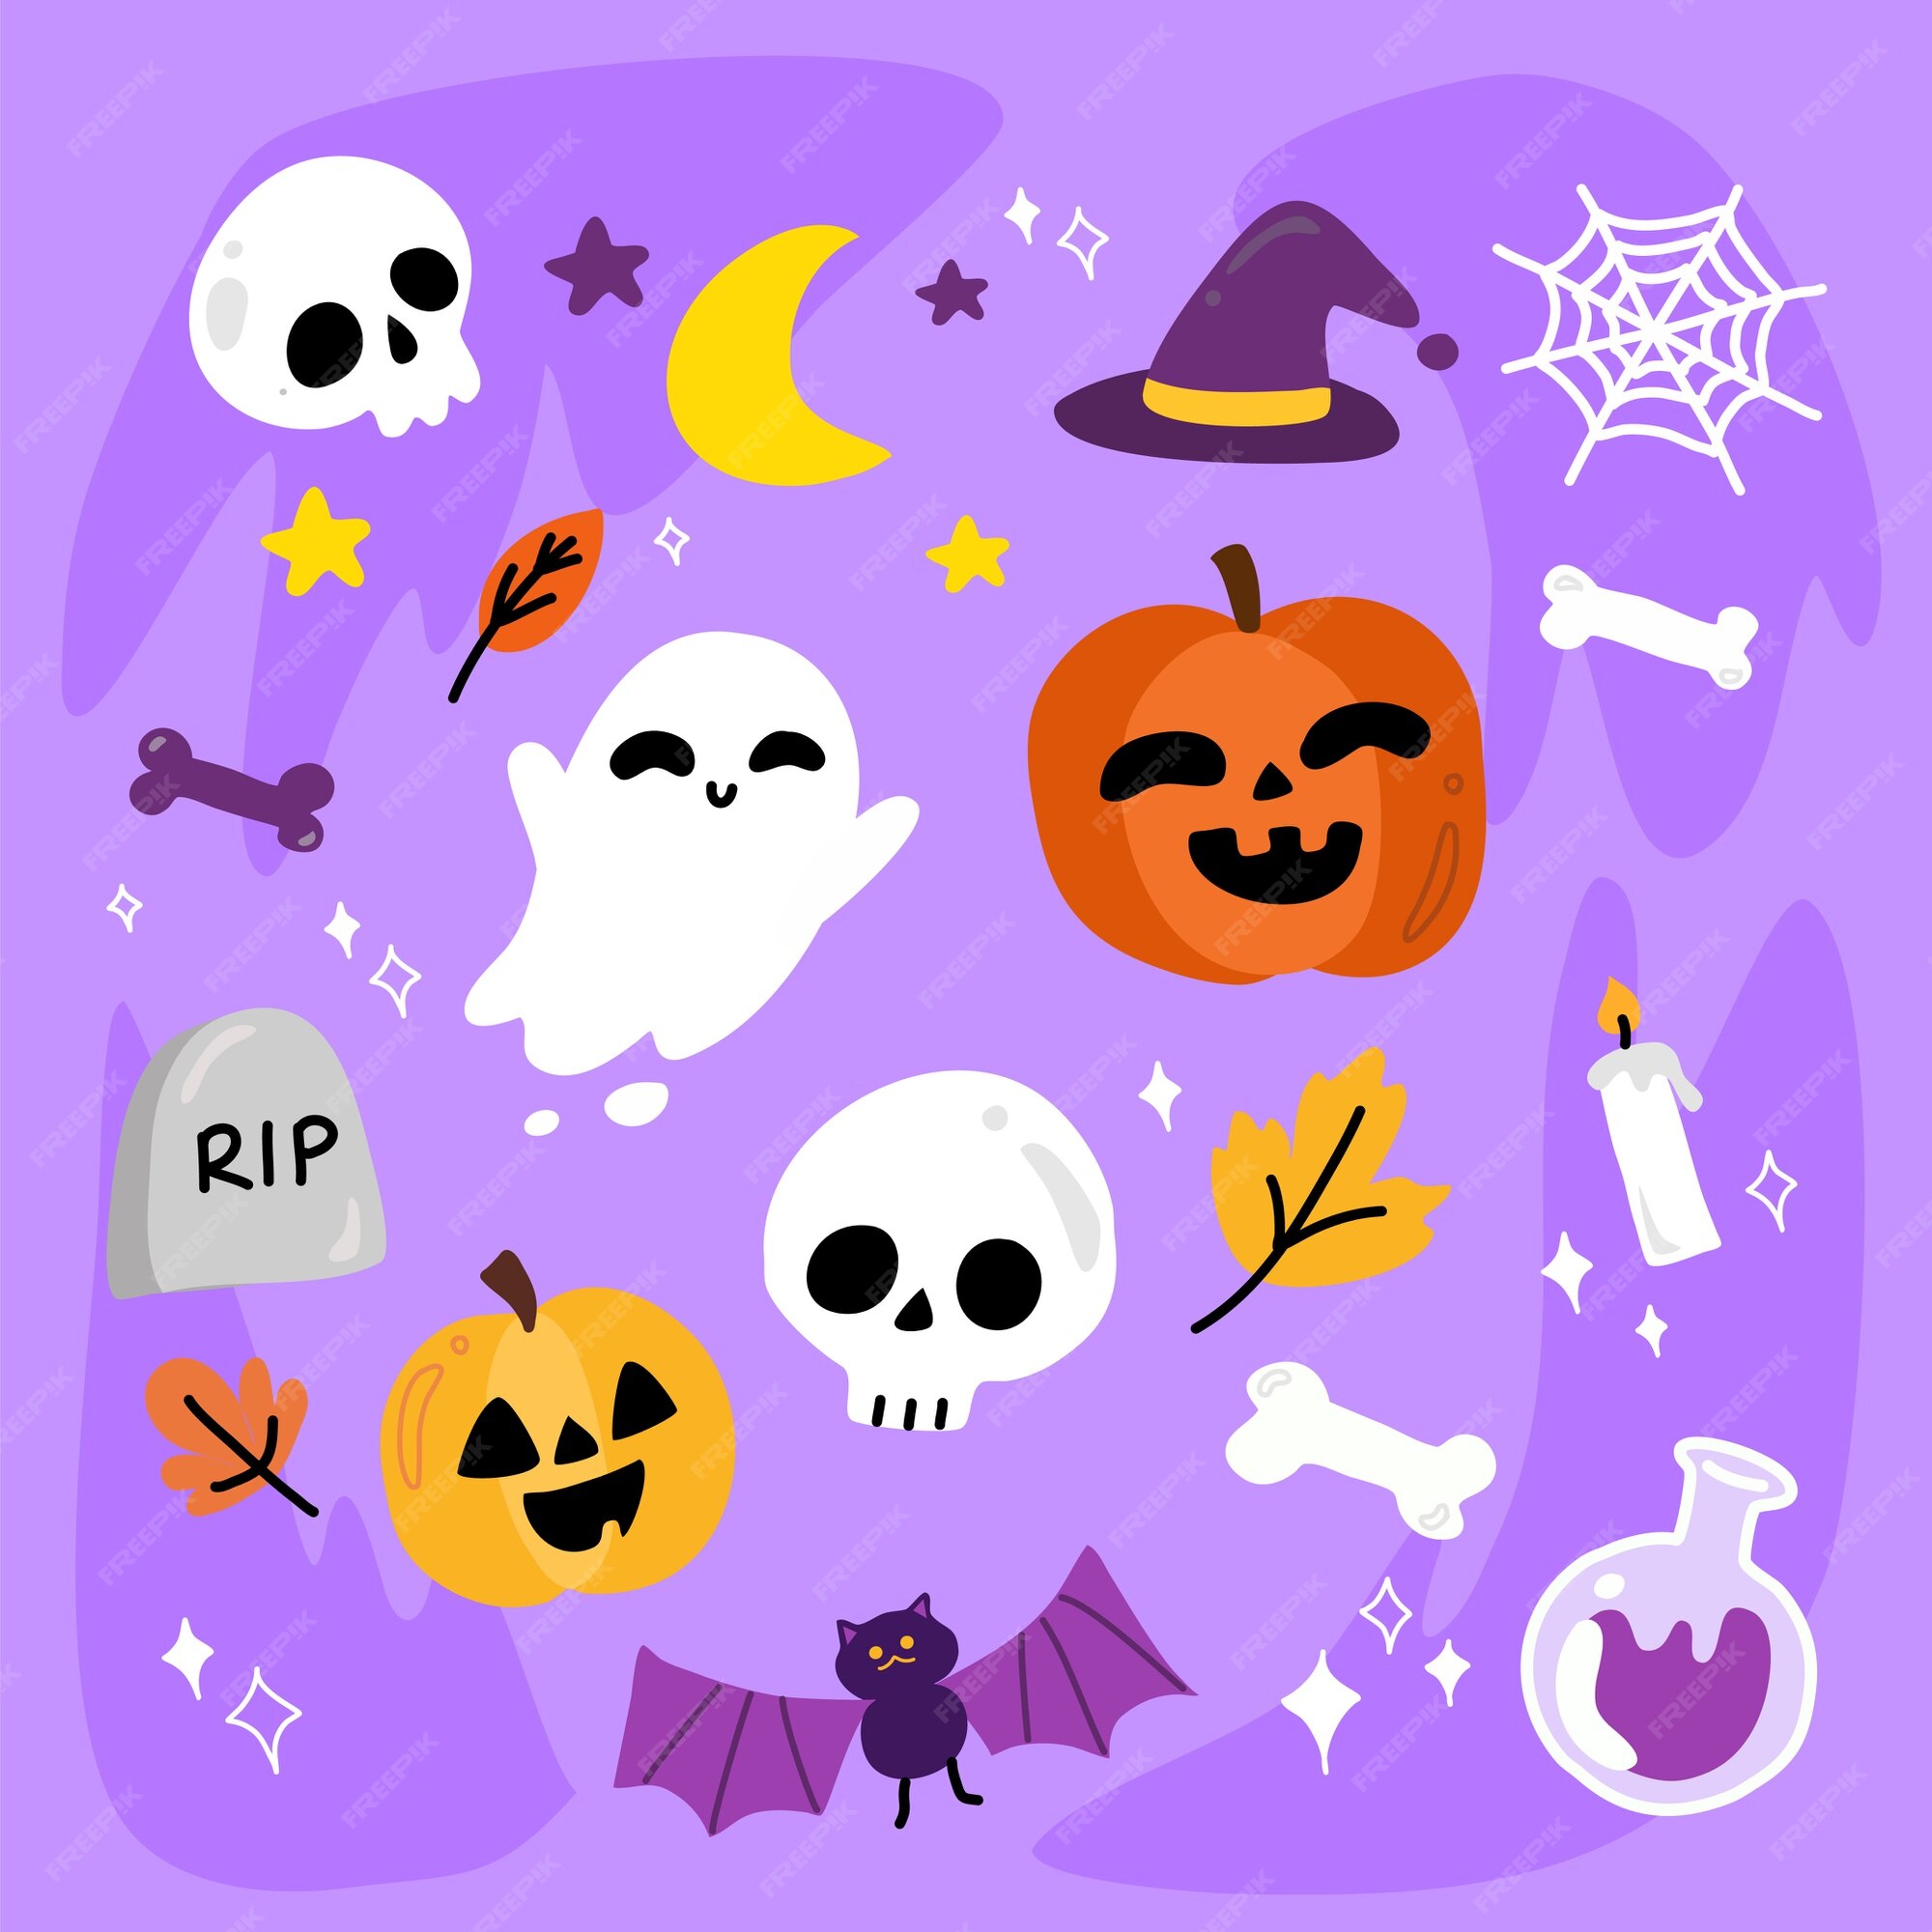 Premium Vector | Cute but scary halloween character illustration design ...